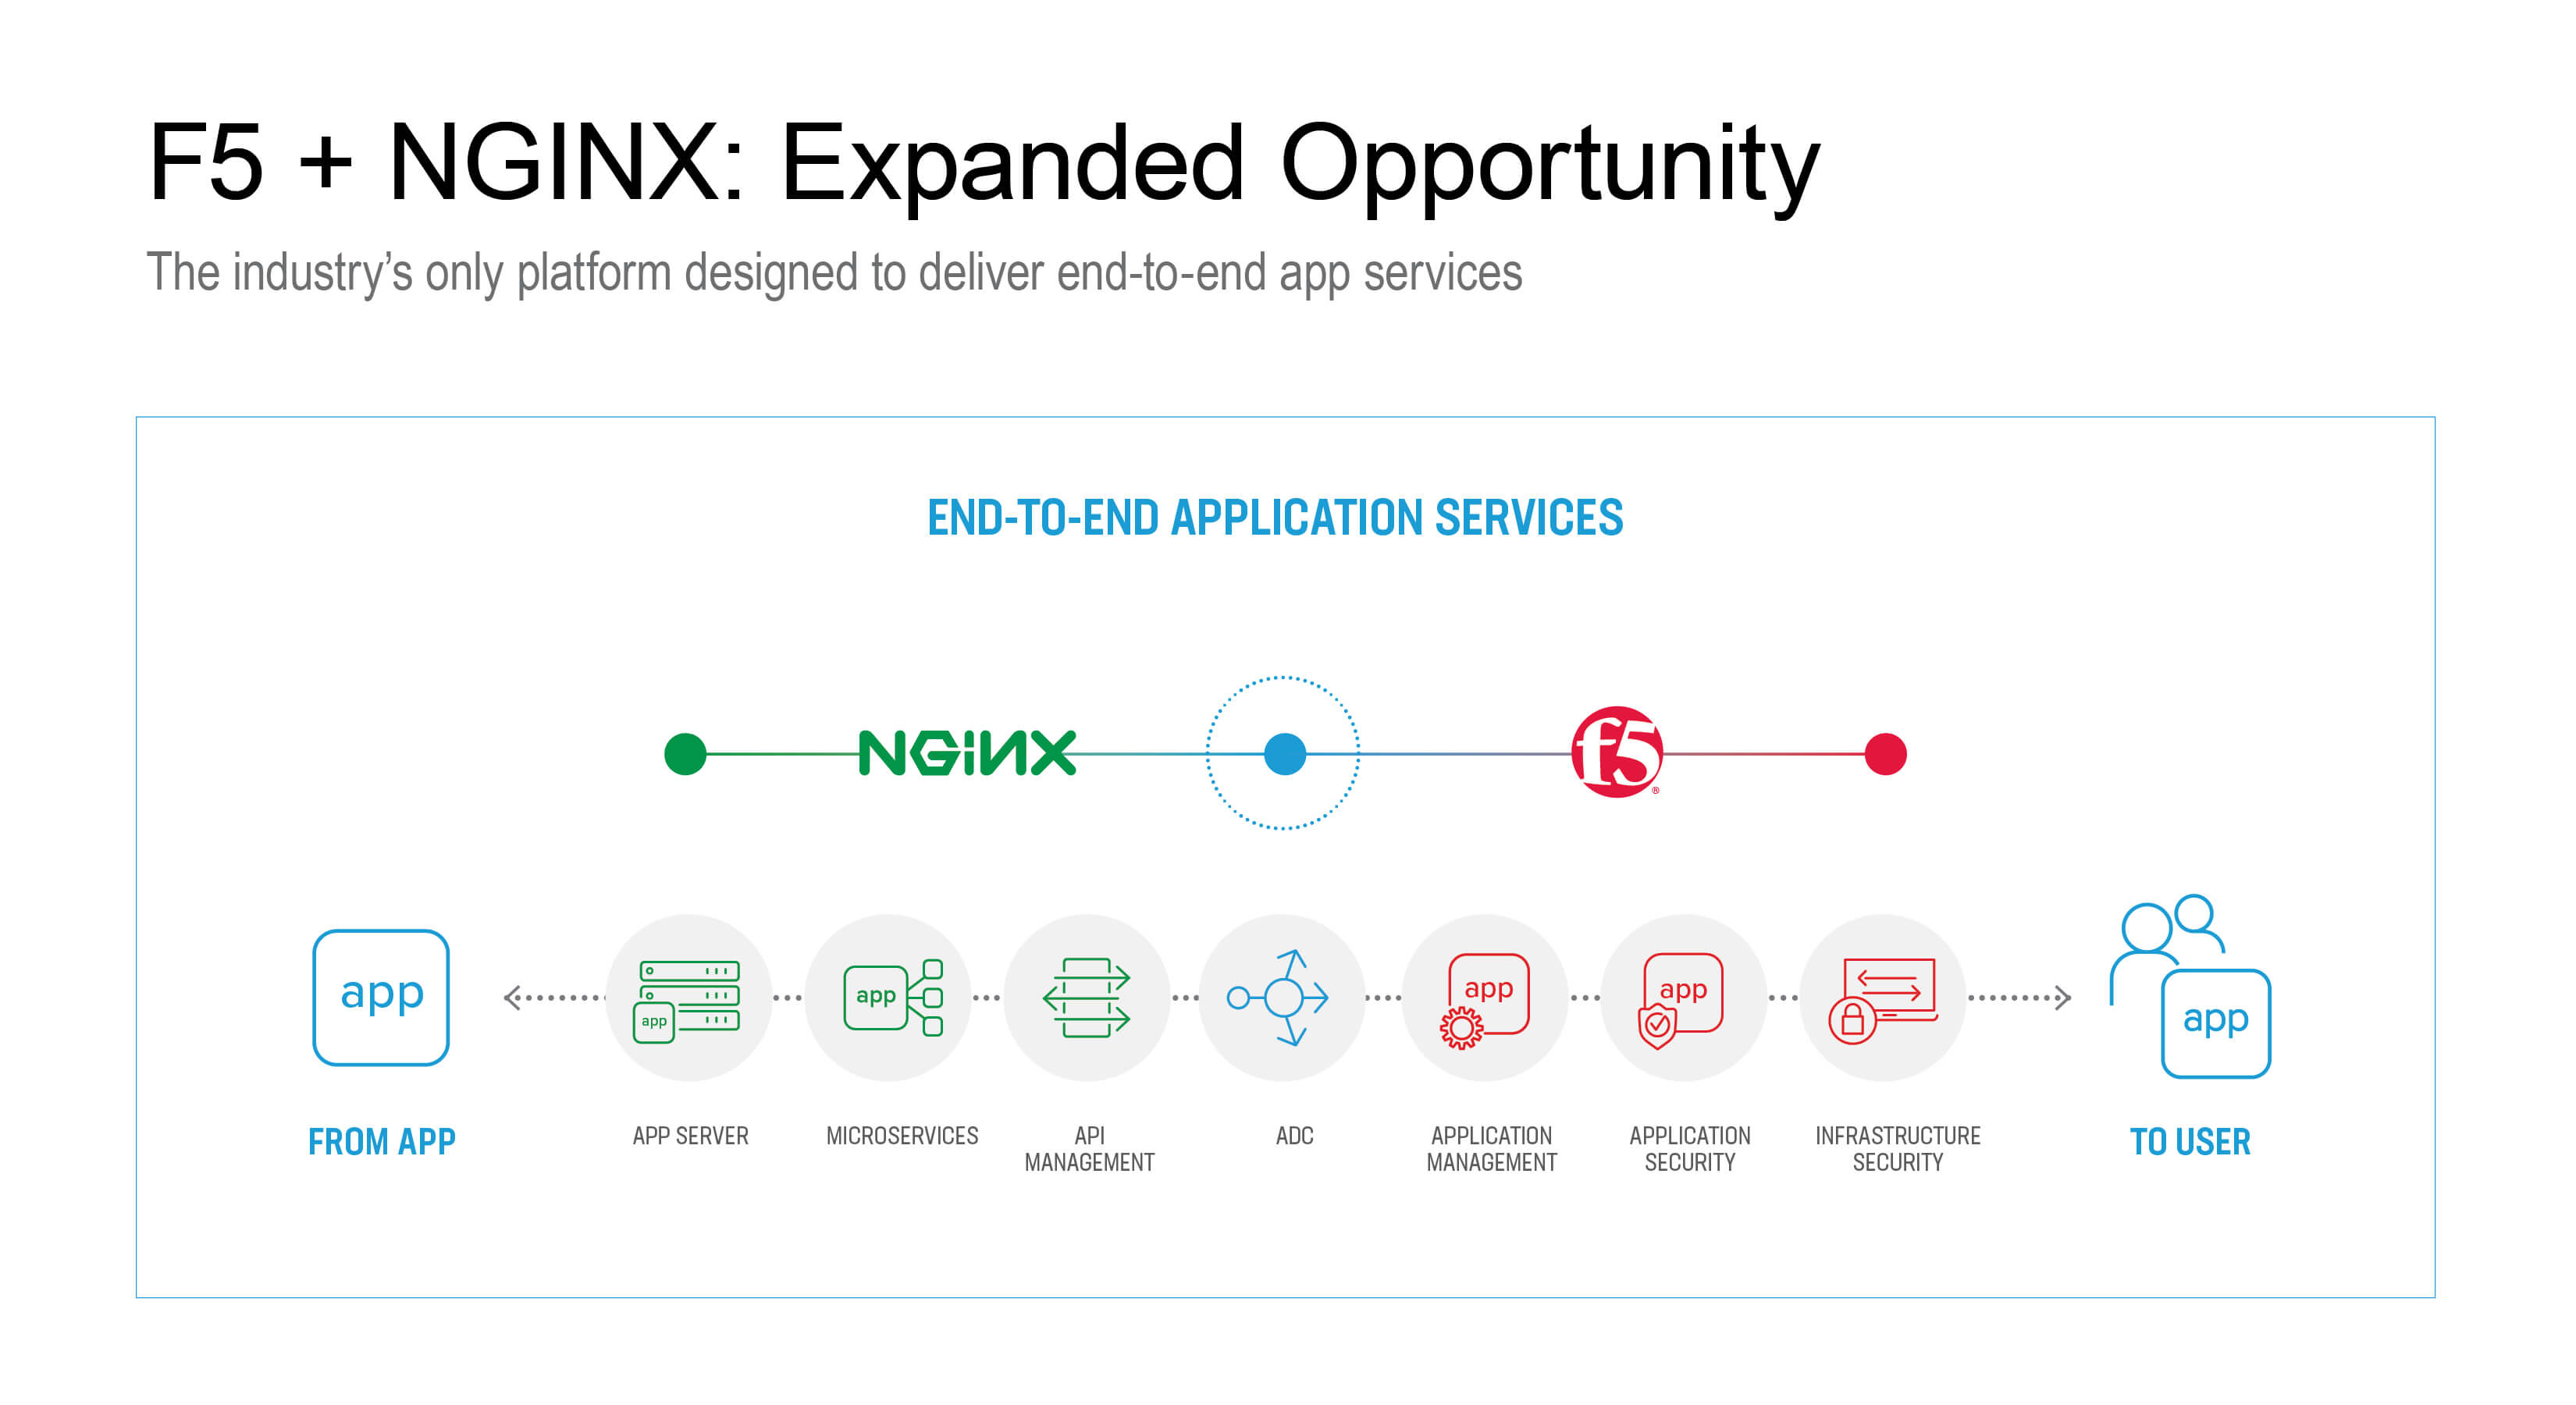 F5 to Acquire NGINX